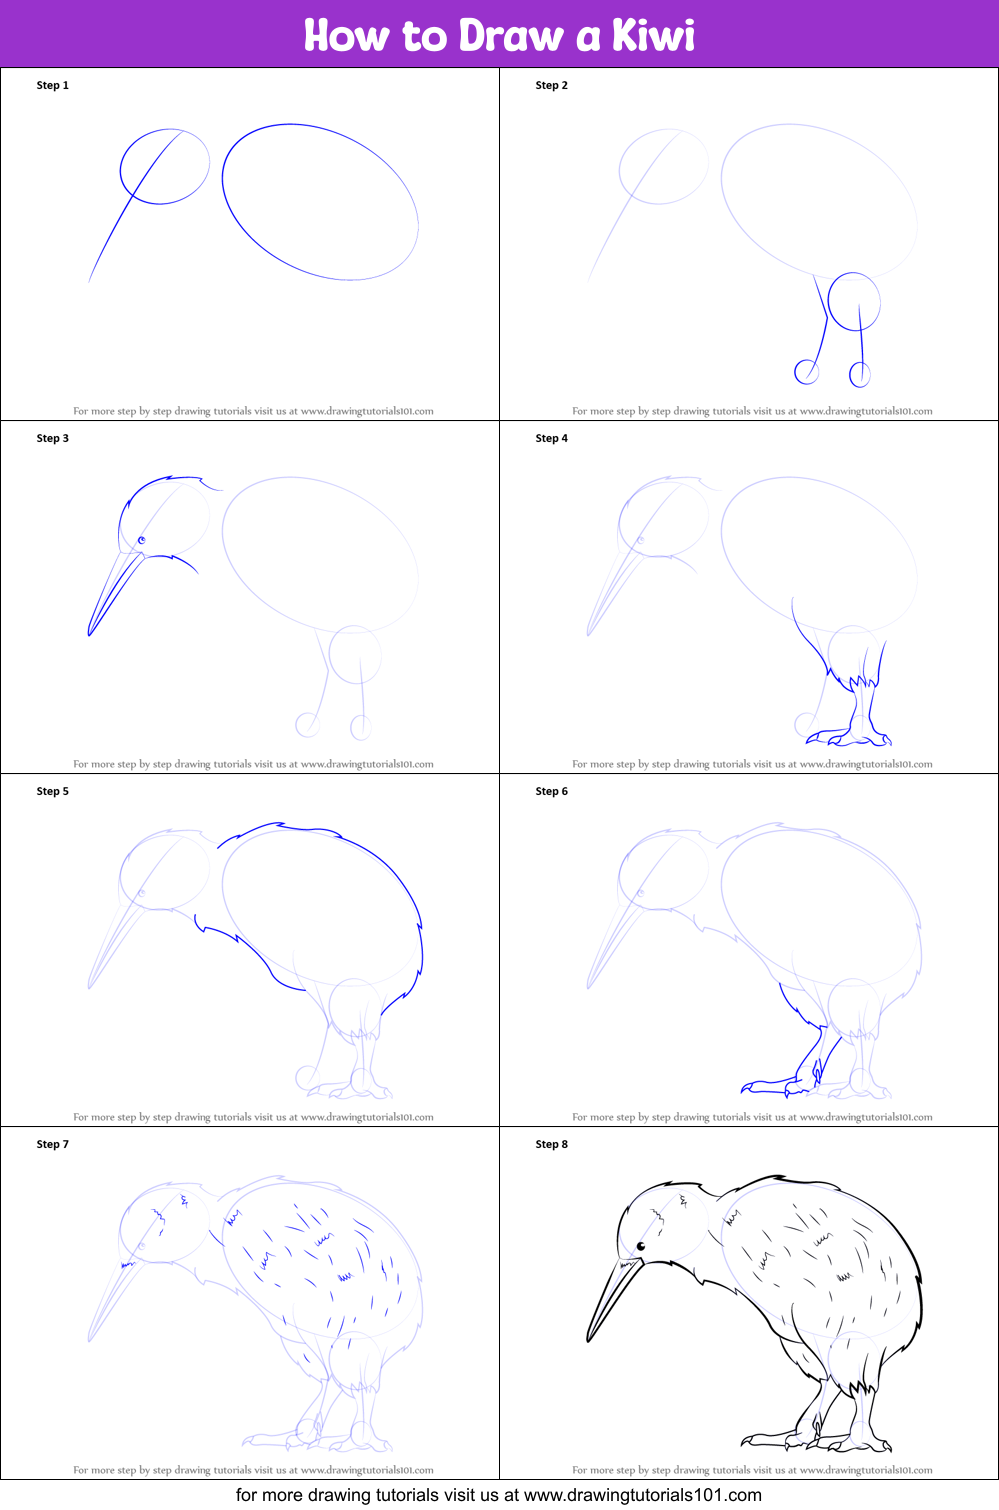 How to Draw a Kiwi printable step by step drawing sheet